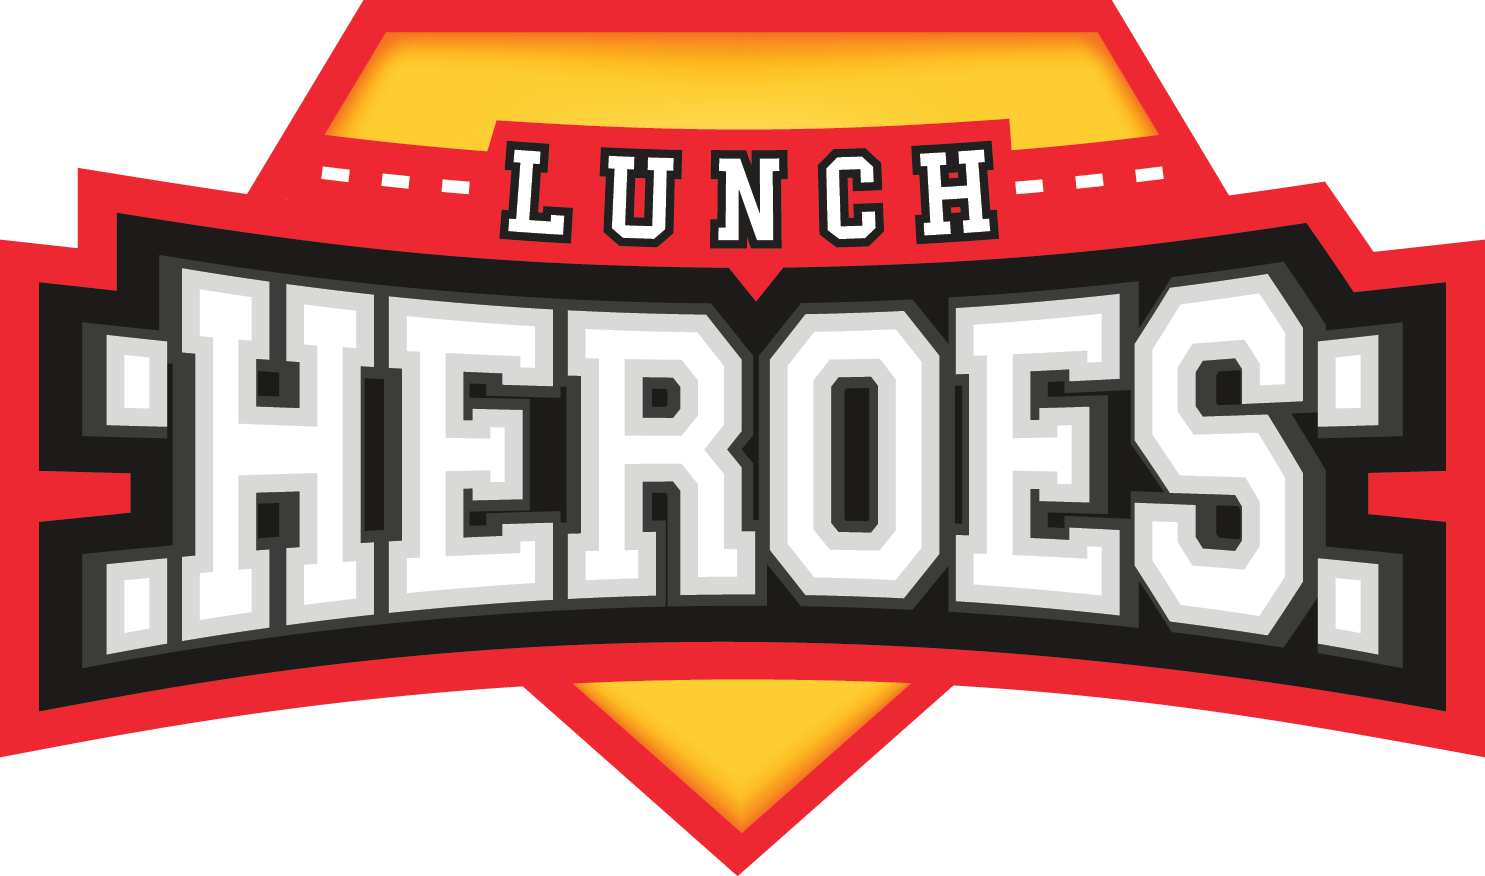 Luncheon clipart parent. Fhsd launches lunch heroes